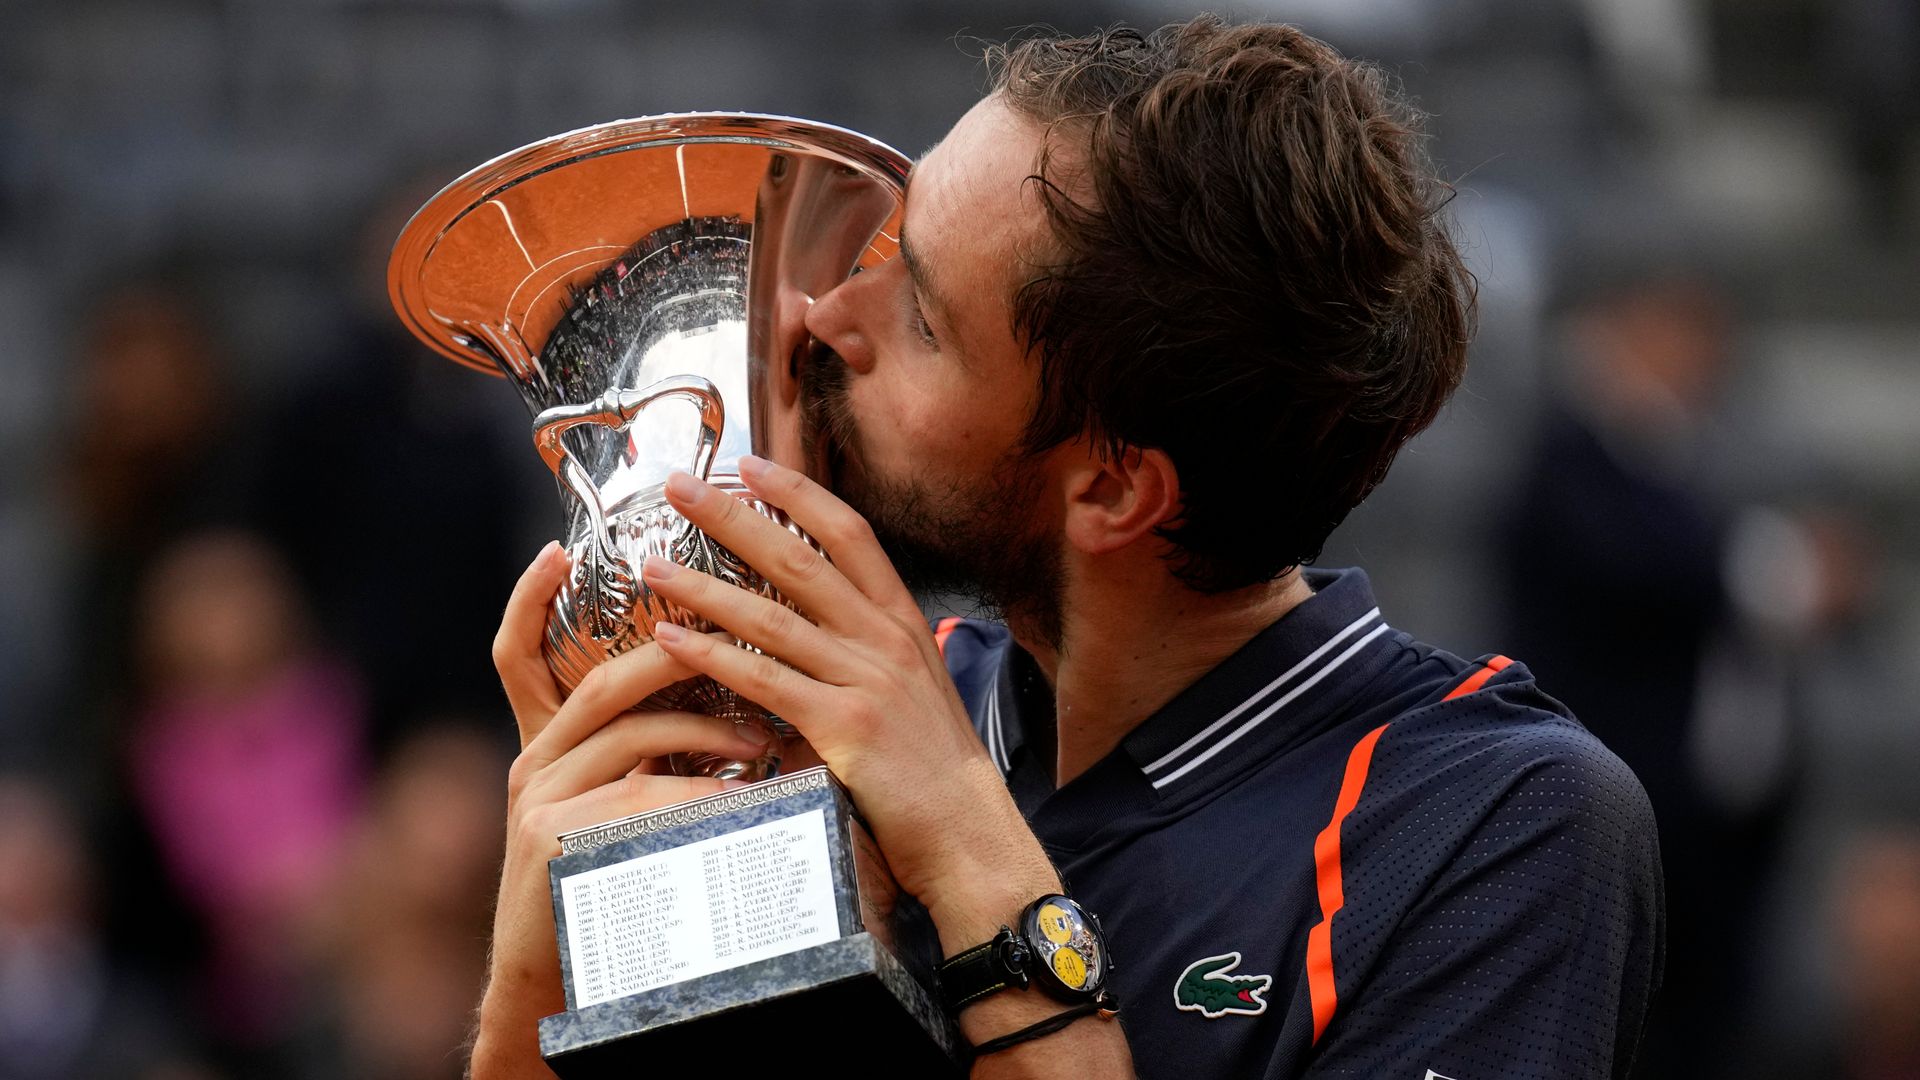 Medvedev claims first clay-court title ahead of Roland Garros